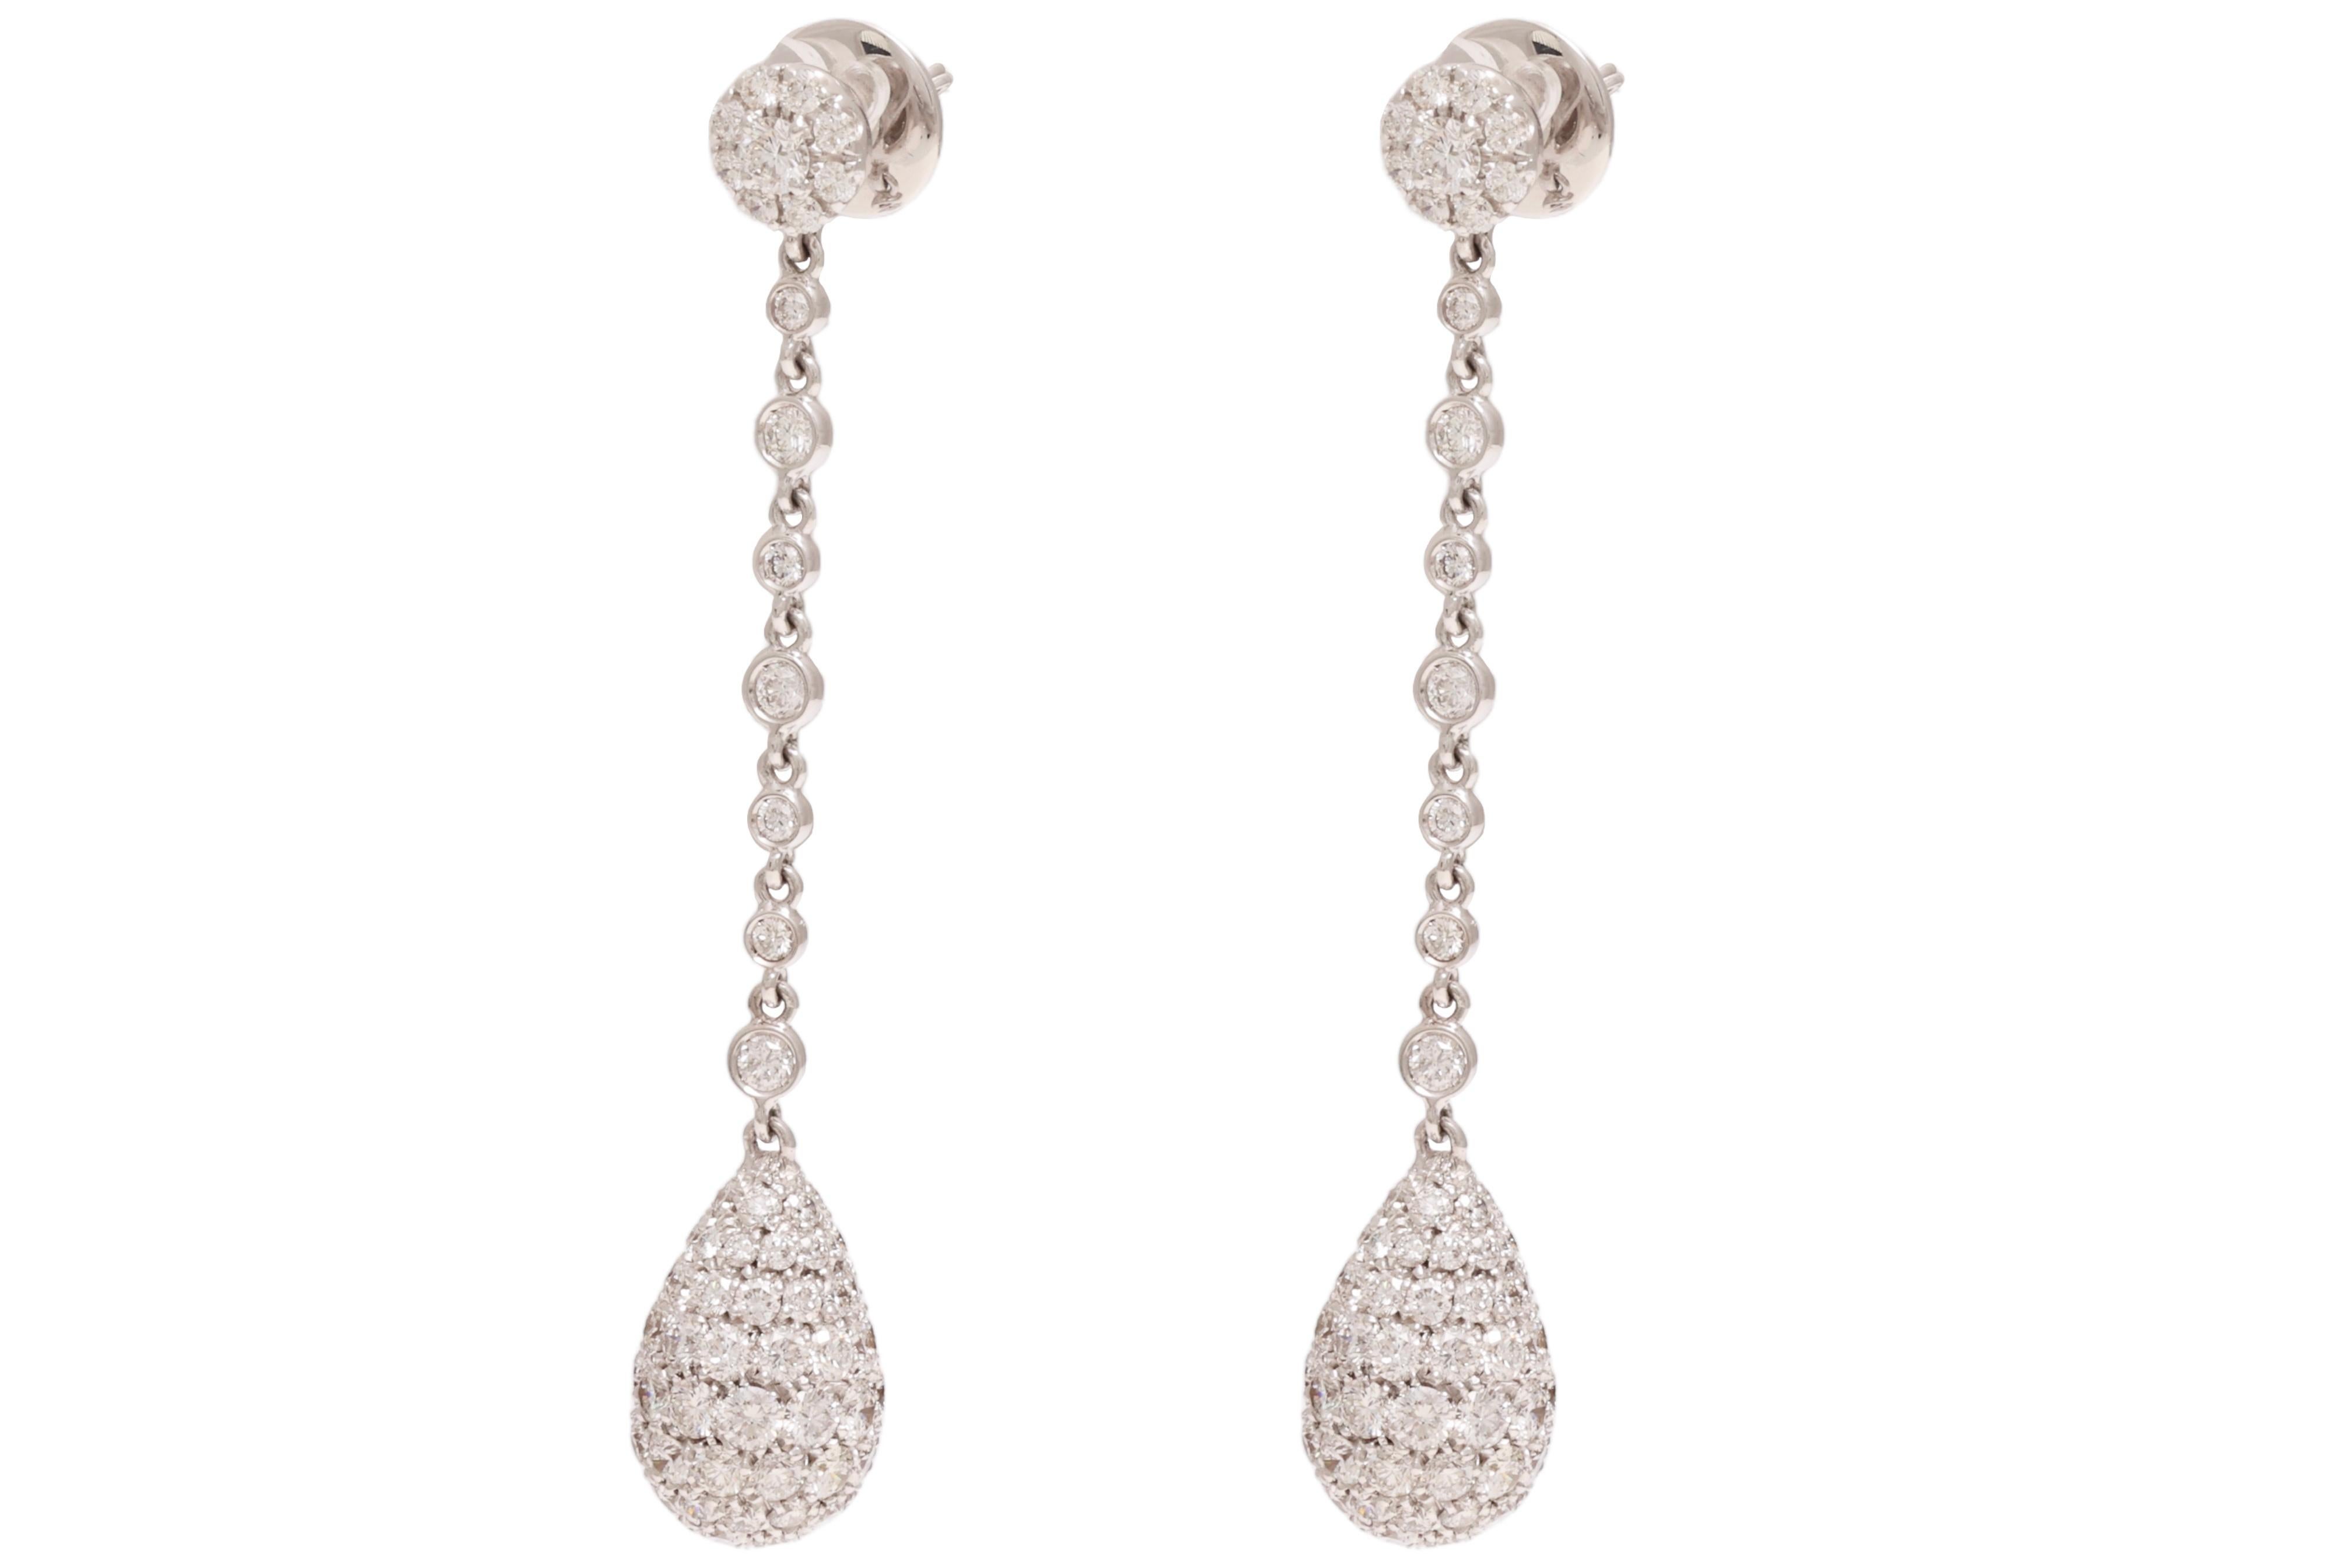 Exquisite 18kt White Gold Drop Earrings With 10.10ct Diamonds

Diamonds: Brilliant cut diamonds together approx. 10.10ct G SI

Material: 18kt white gold

Measurements: 69mm x 11.5mm 

Total weight: 16.2 gram / 0.570 oz / 10.4 dwt